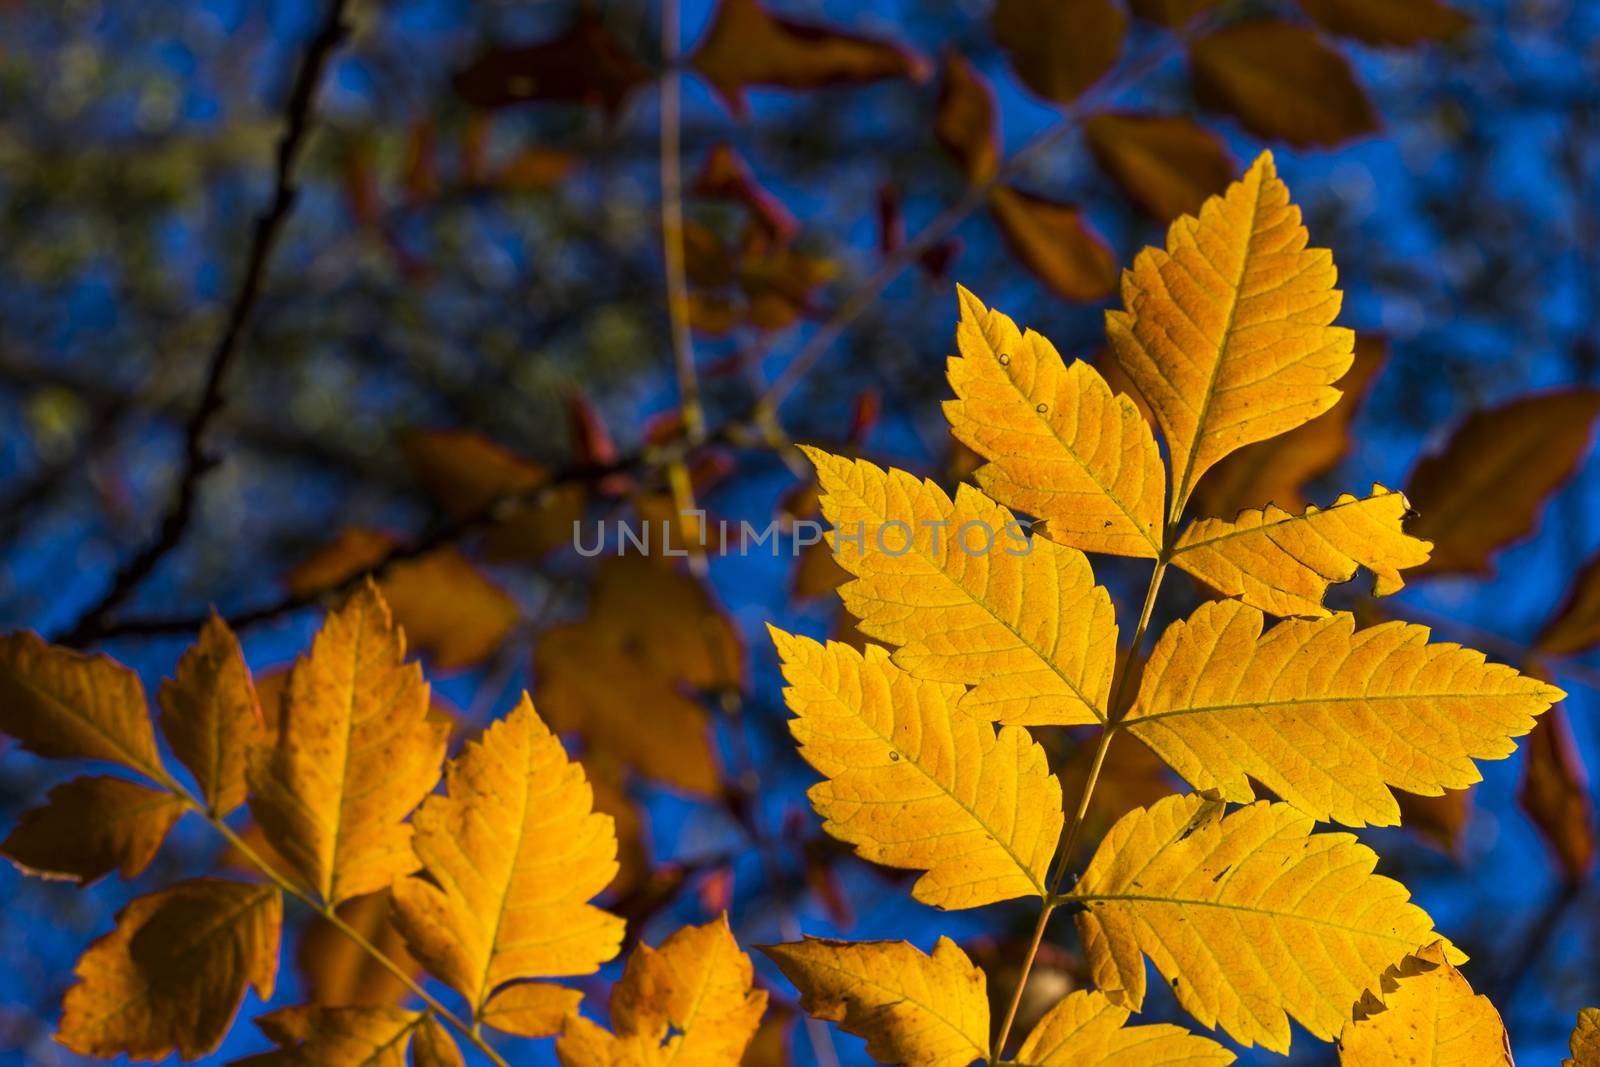 Autumn and fall yellow leave close-up, nature background, yellow color of ash-tree leave